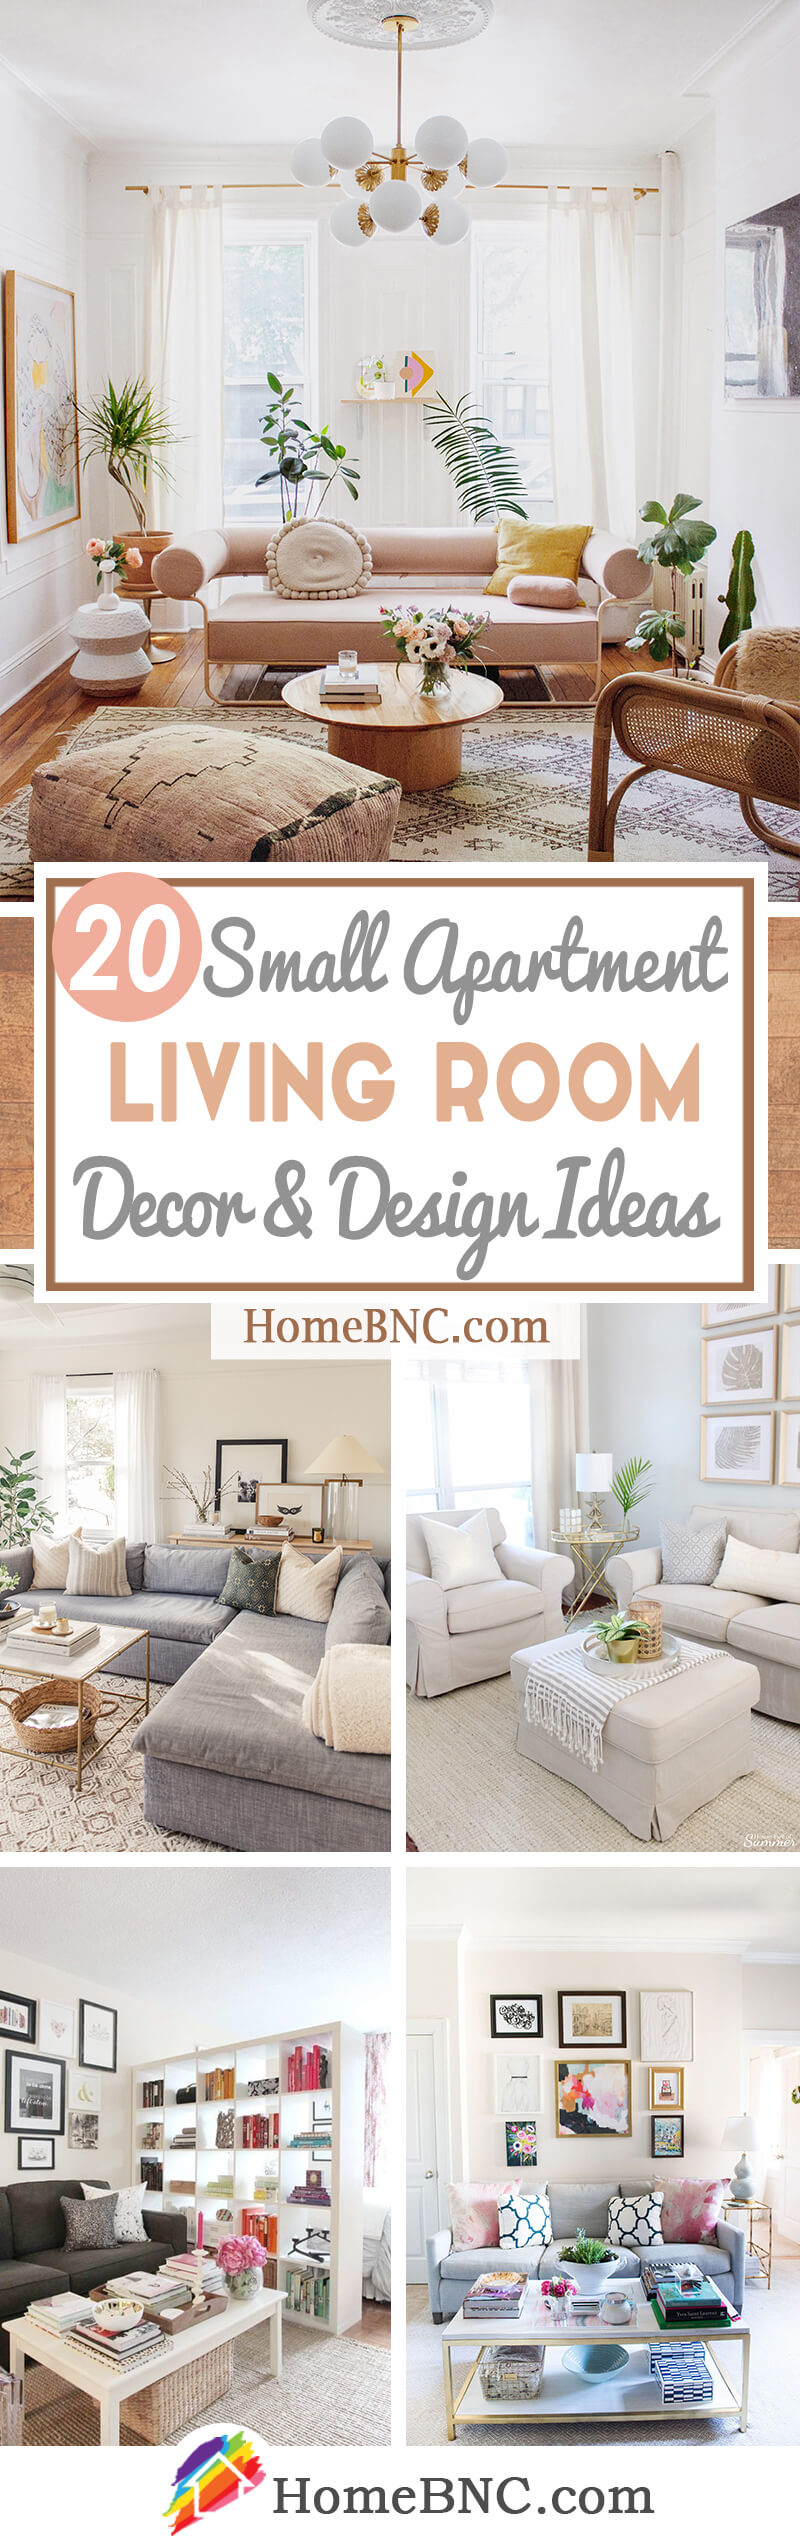 20 Best Small Apartment Living Room Decor and Design Ideas for 2021